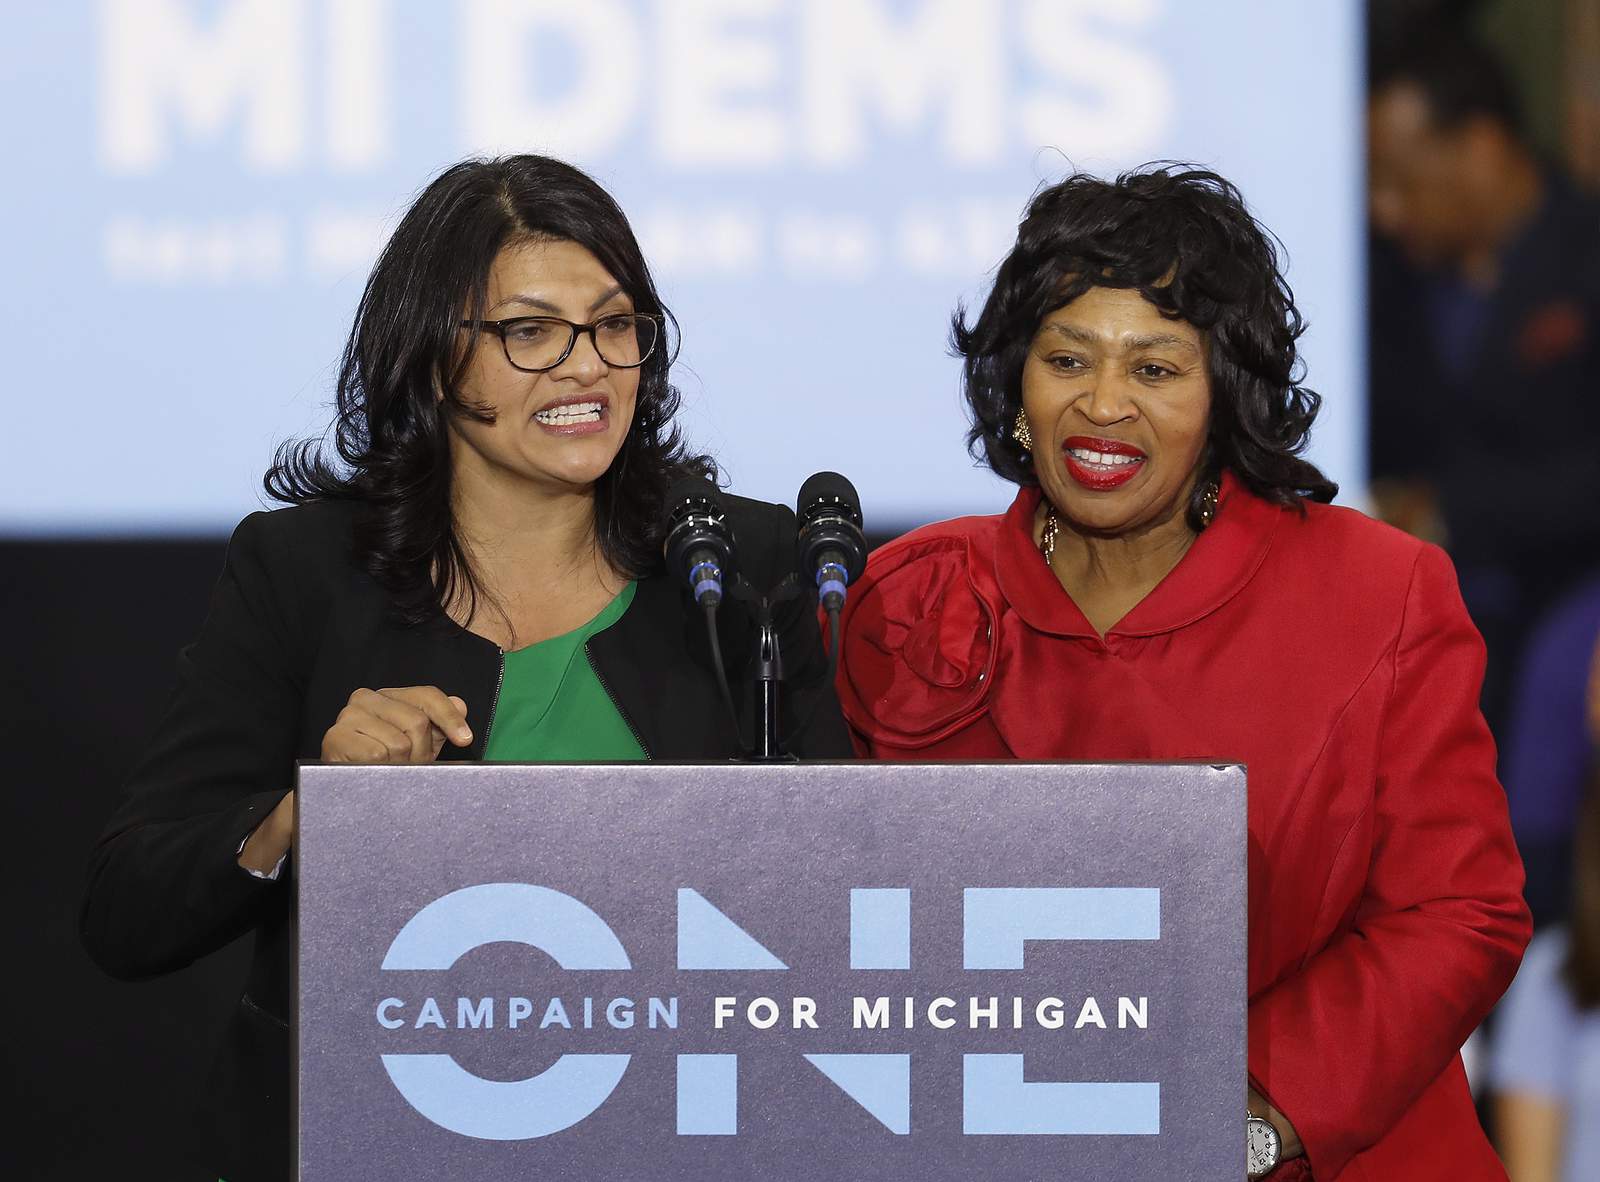 'Squad' member Tlaib may be vulnerable in tough primary